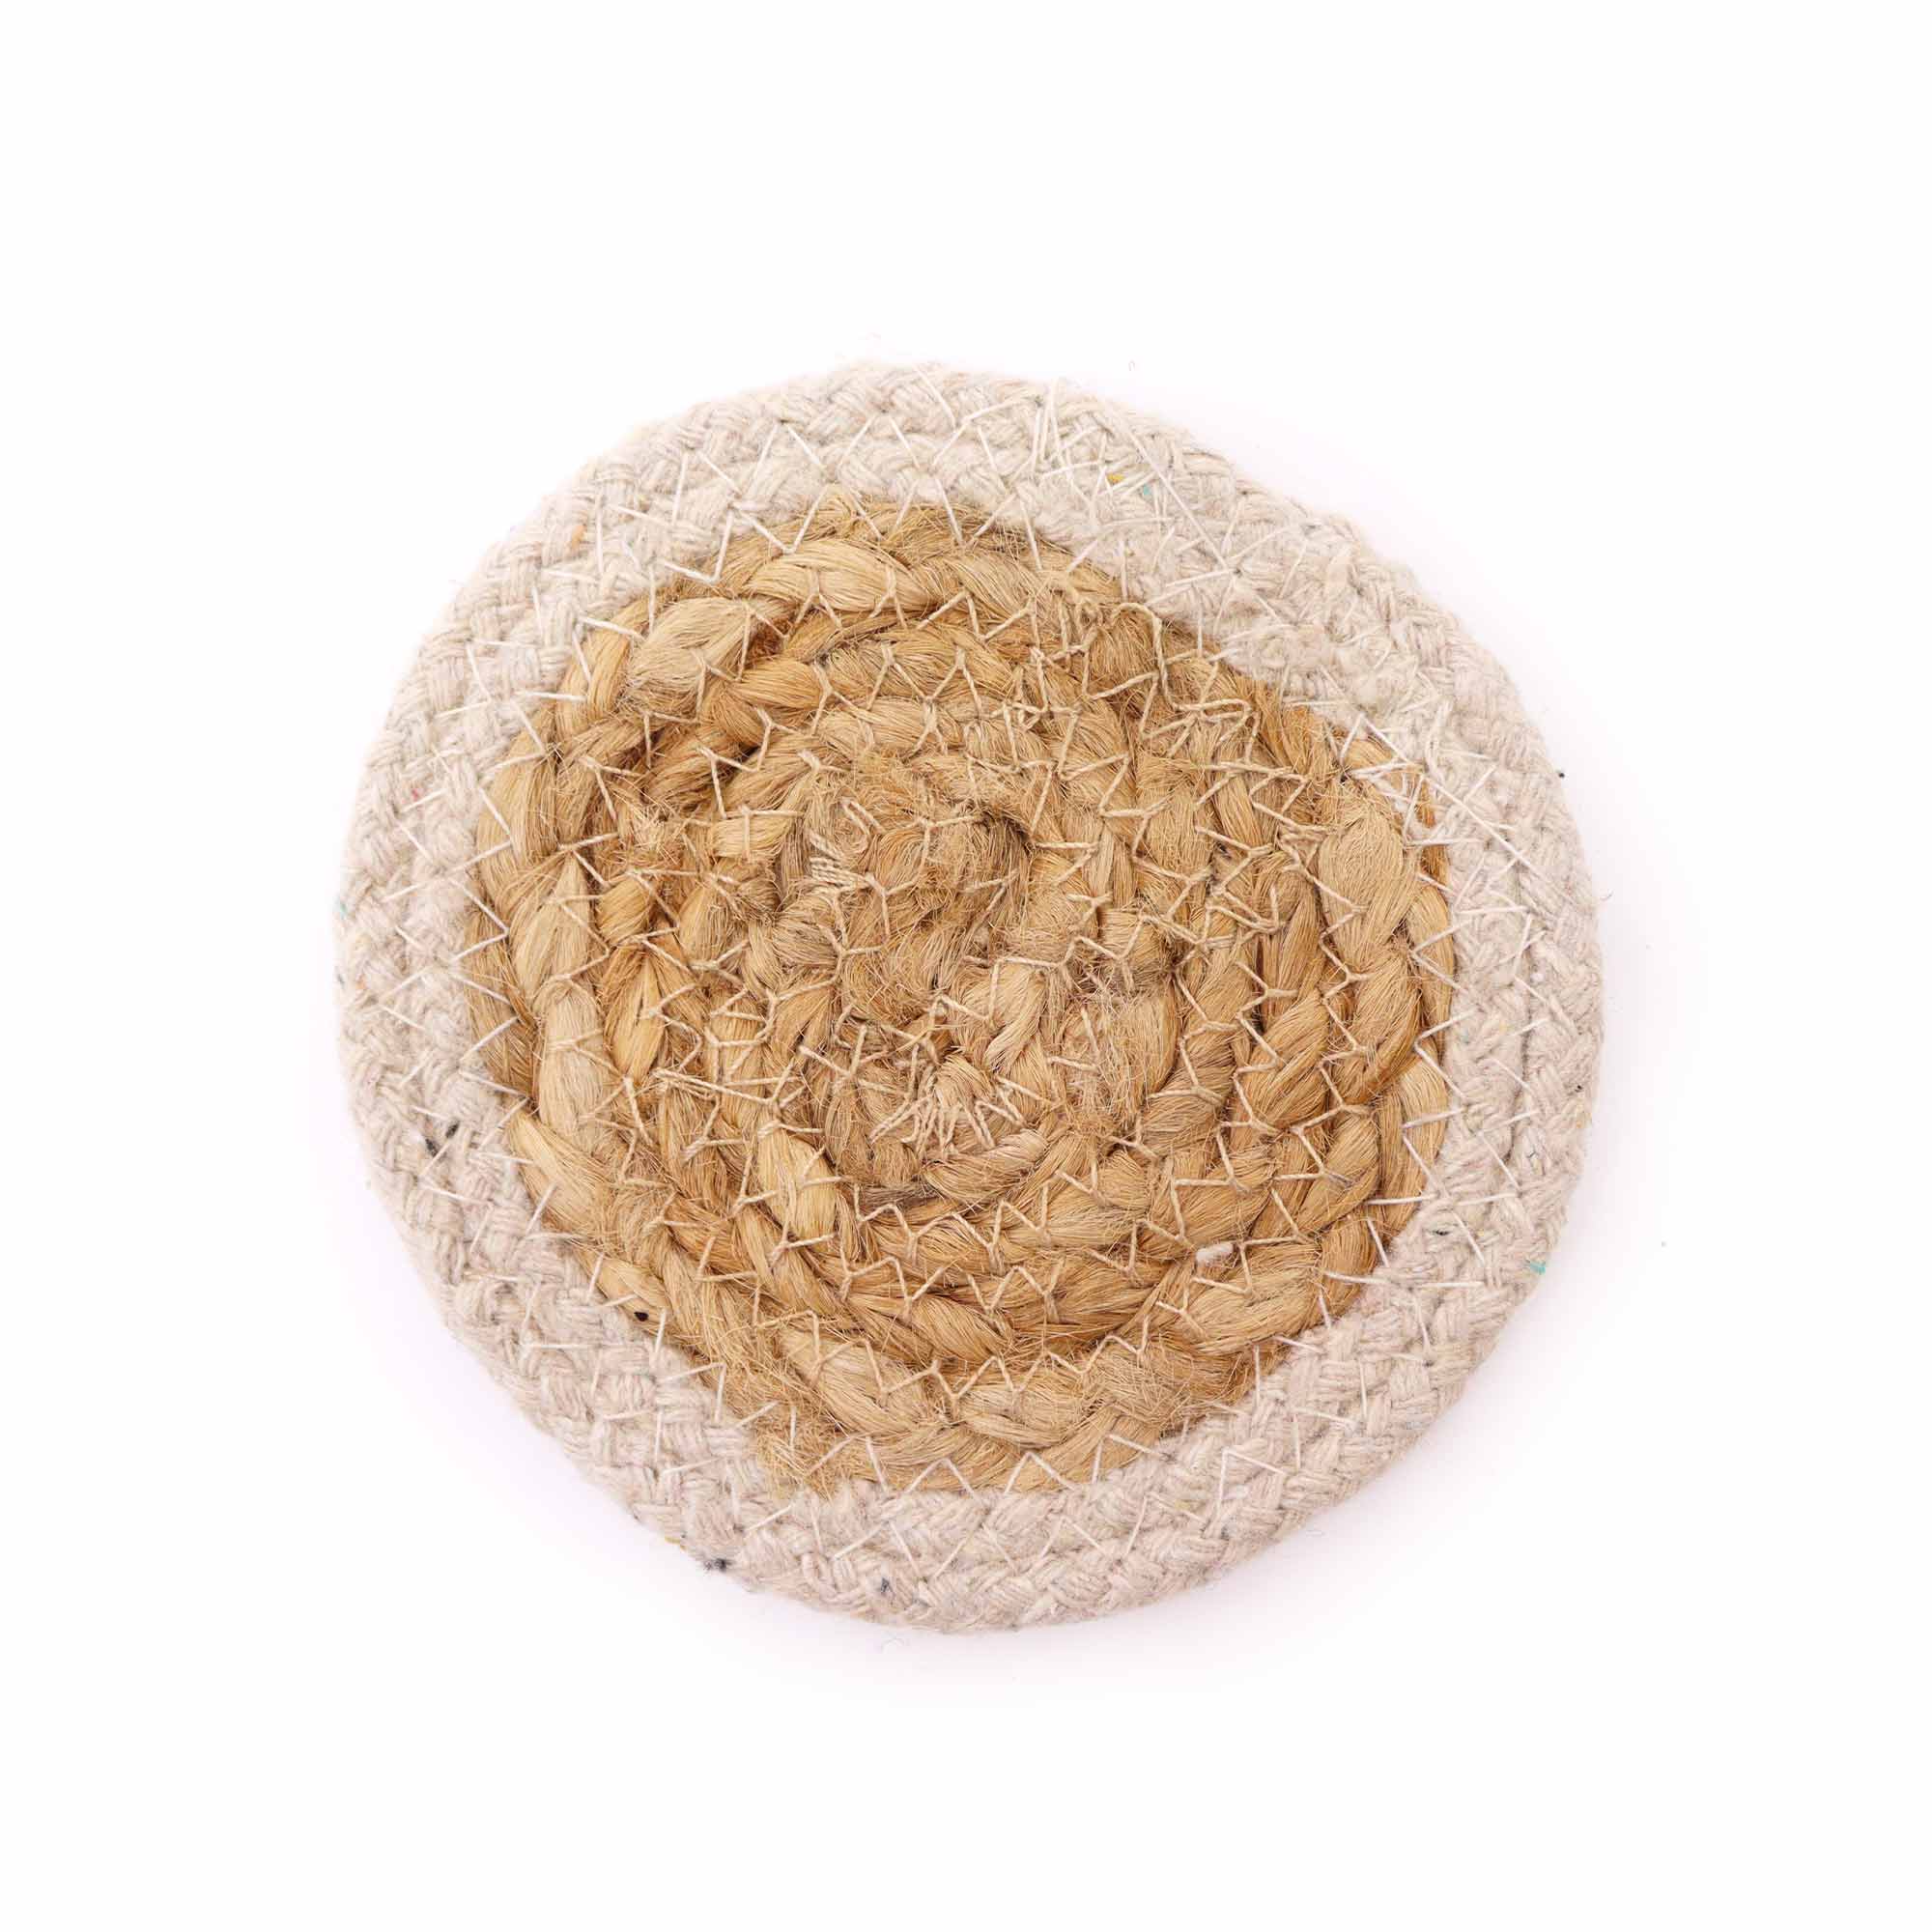 View Natural Coaster Jute Cotton 10cm set of 4 Ivory Boarder information